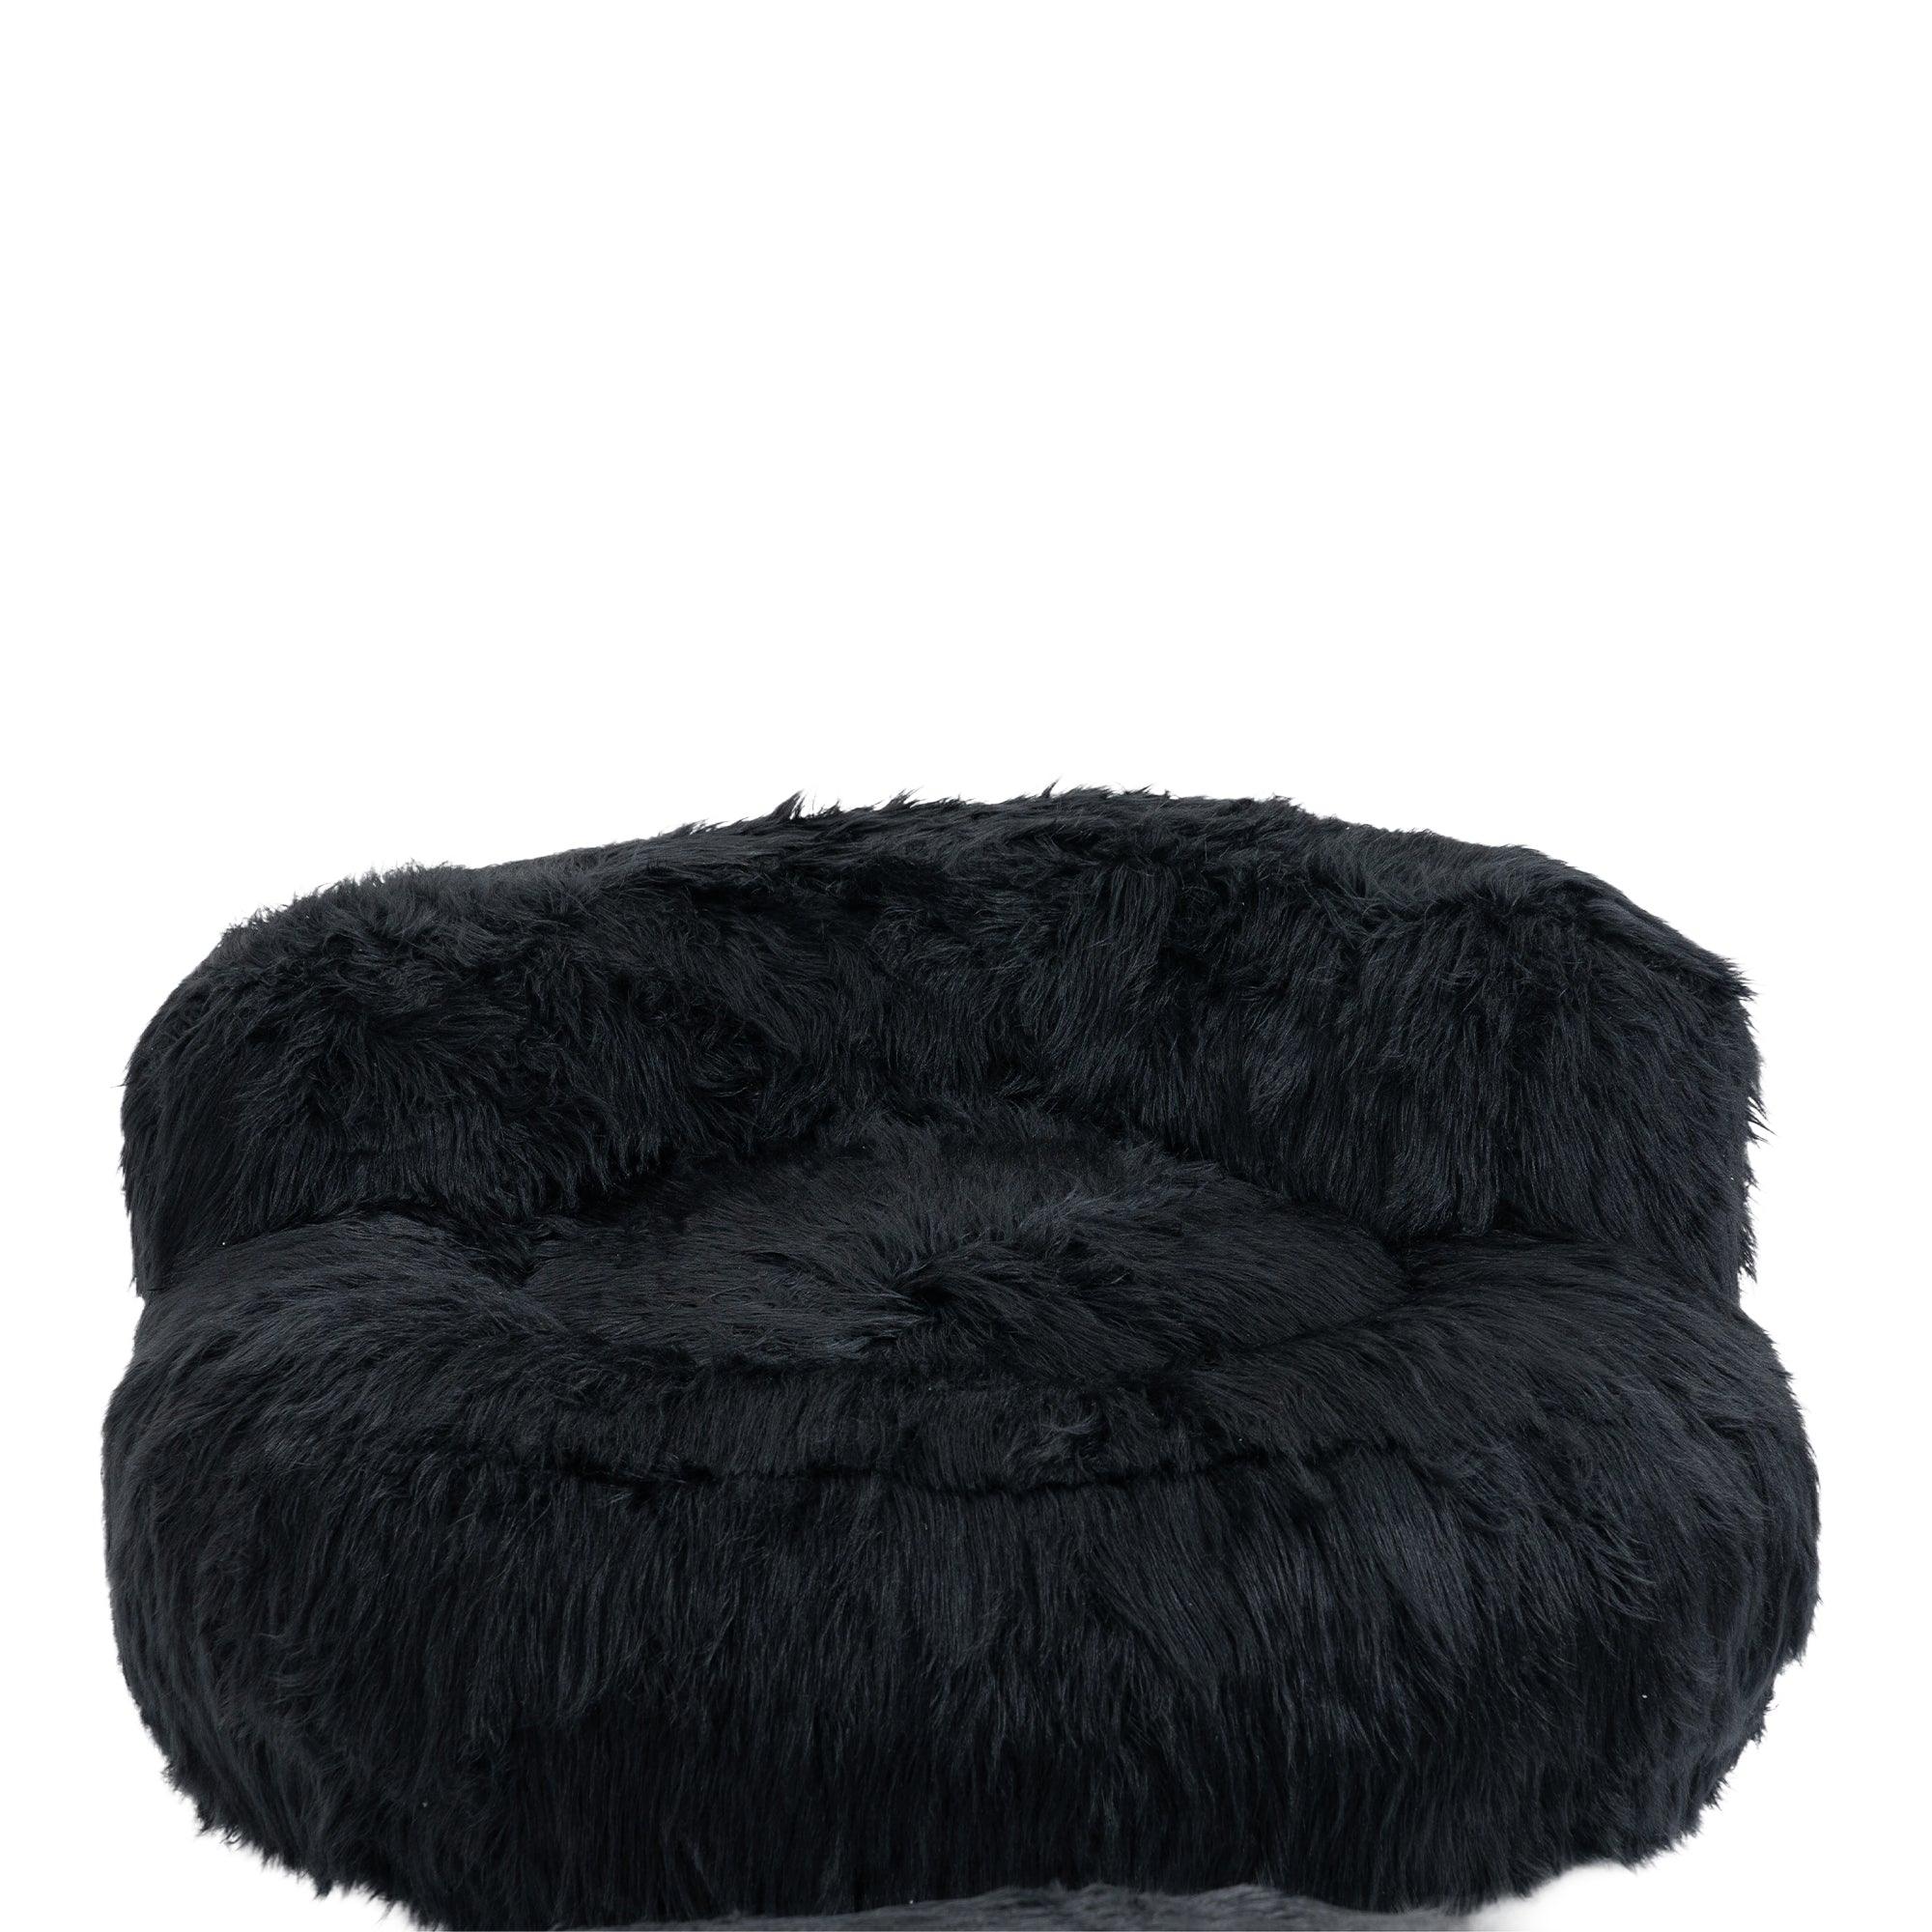 Gramanda 2-In-1 Bean Bag Chair Faux Fur Lazy Sofa & Ottoman Footstool For Adults And Kids - Black